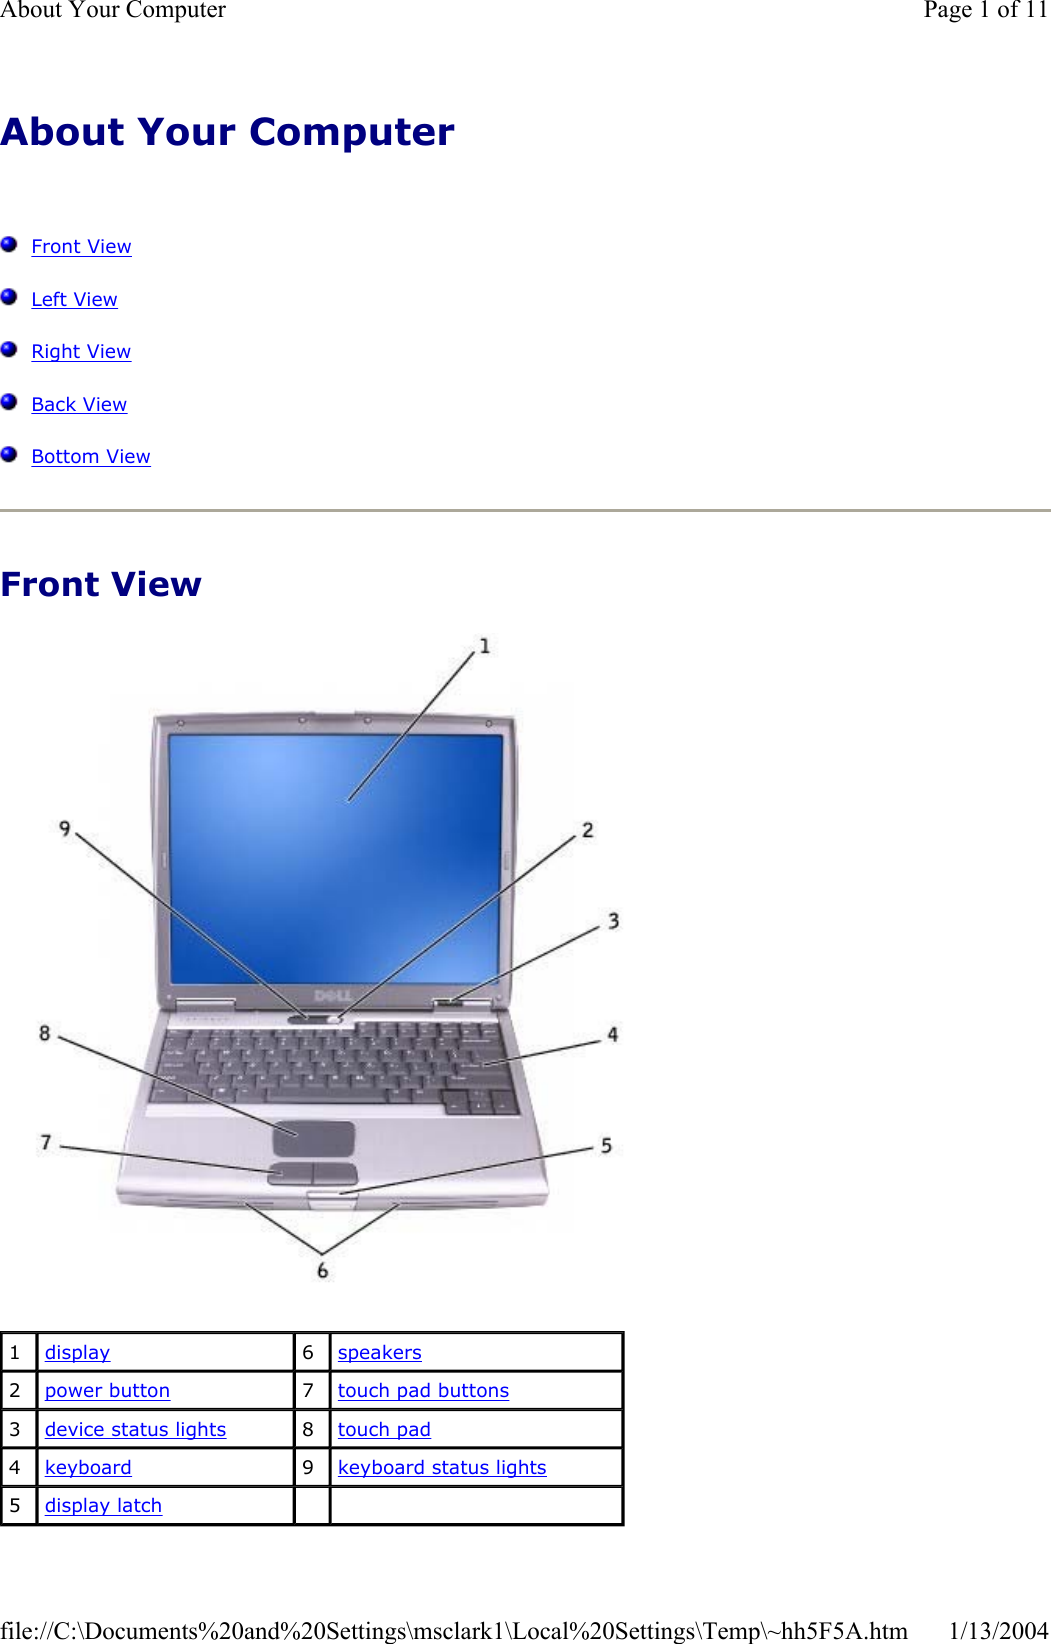 About Your Computer  Front ViewLeft ViewRight ViewBack ViewBottom ViewFront View 1display 6speakers2power button 7touch pad buttons3device status lights 8touch pad4keyboard 9keyboard status lights5display latchPage 1 of 11About Your Computer1/13/2004file://C:\Documents%20and%20Settings\msclark1\Local%20Settings\Temp\~hh5F5A.htm